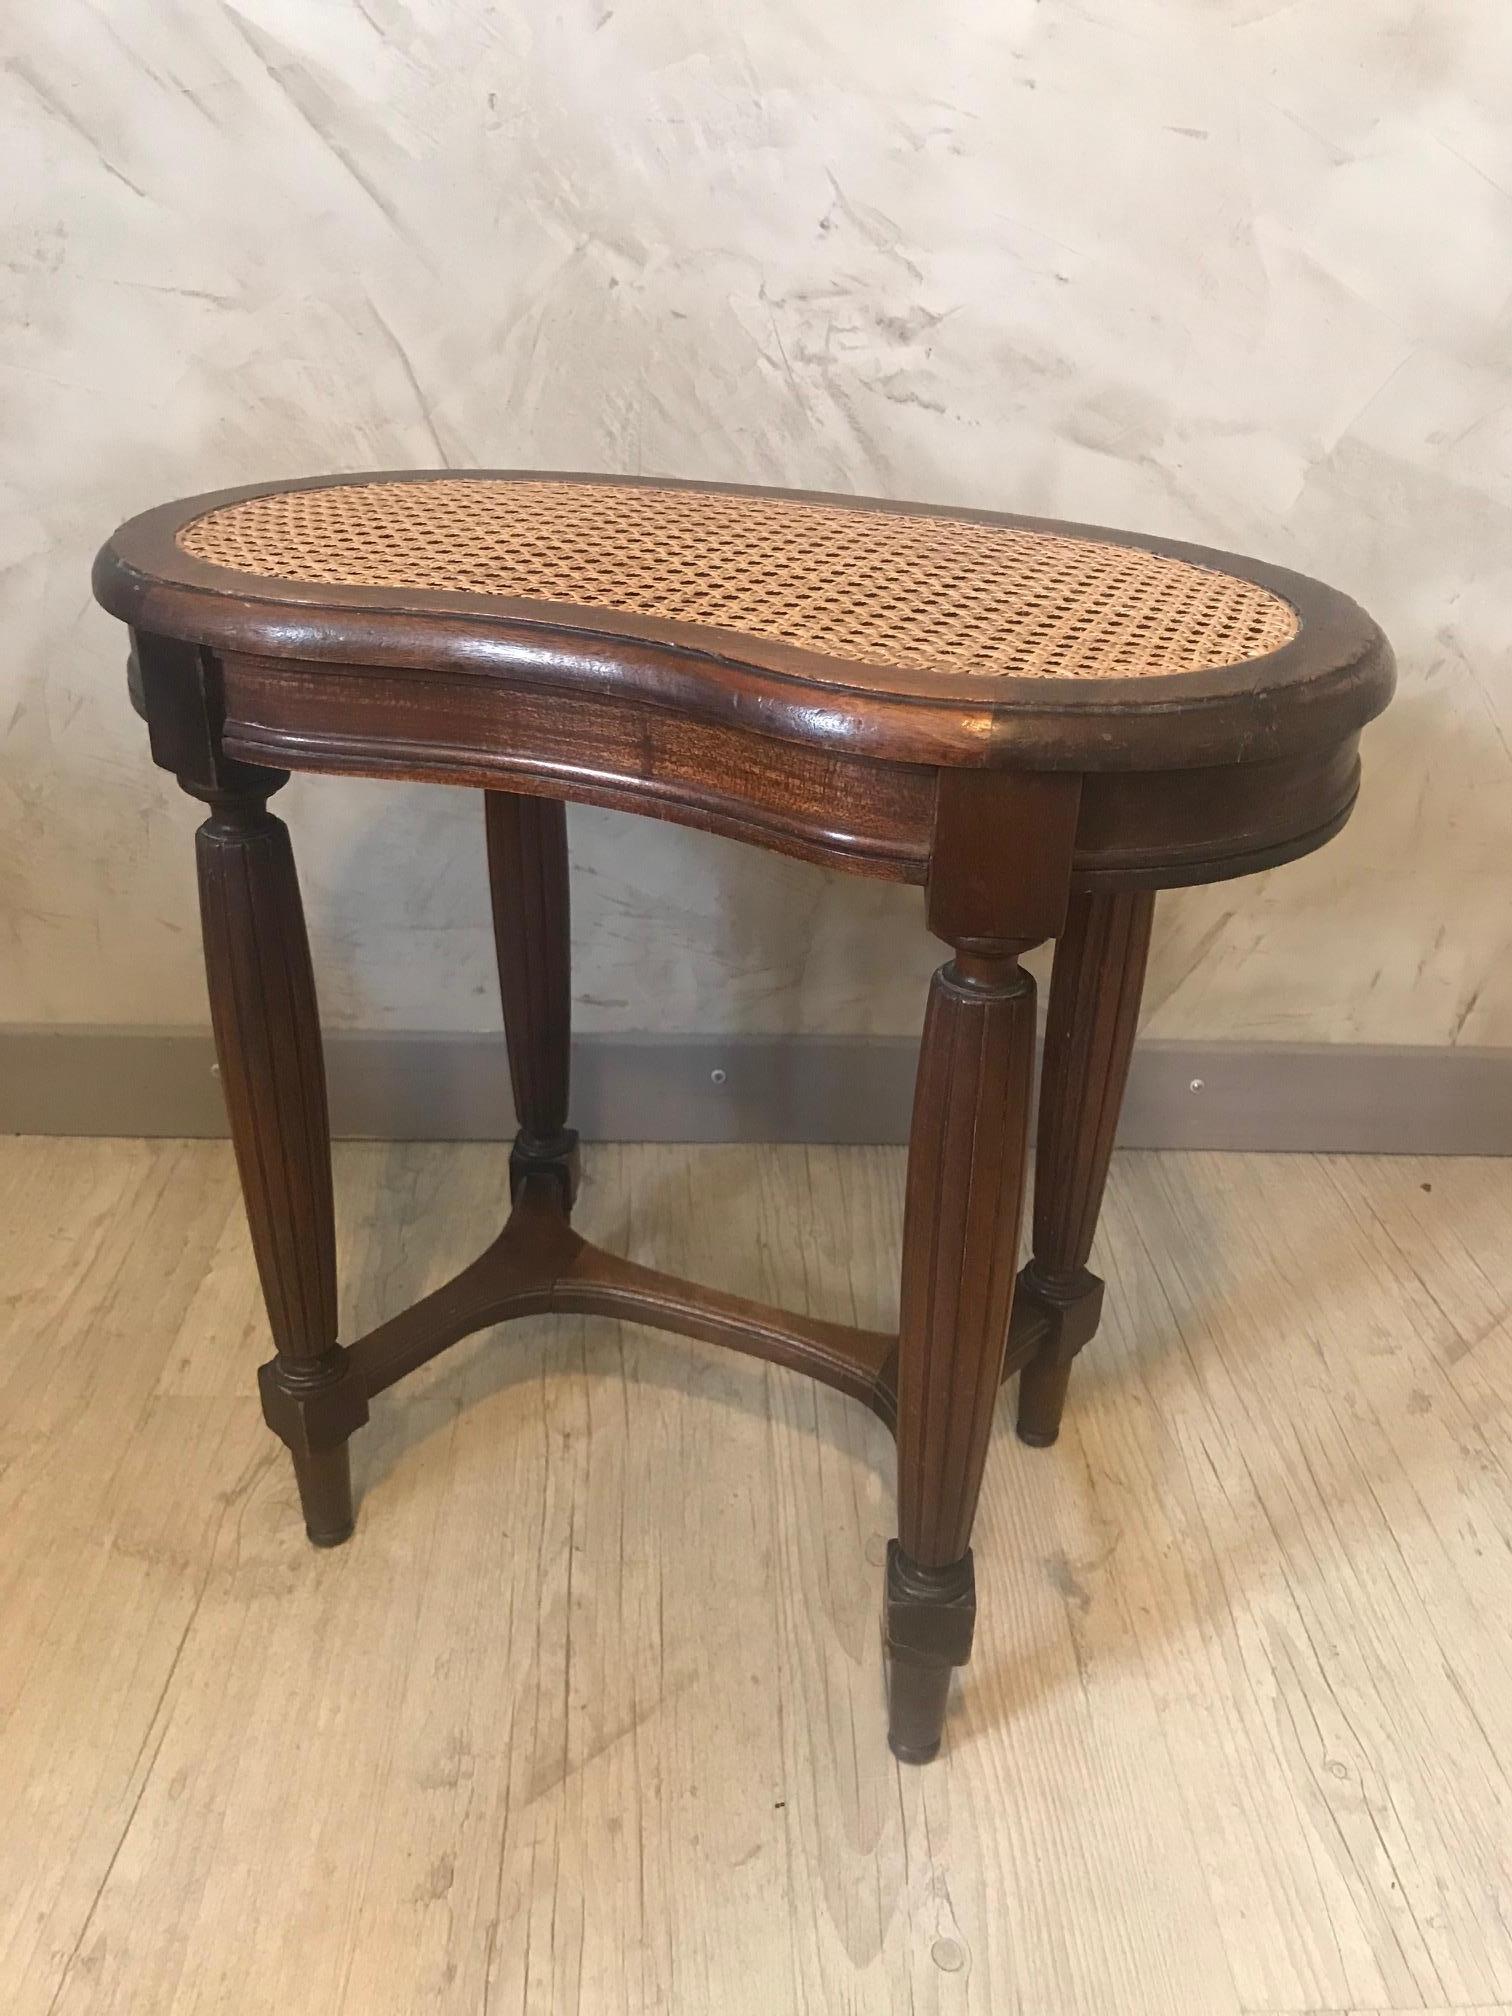 Early 20th century French Louis XVI style walnut and caned Piano bench from the 1900s.

Some scratches on the wood but the seating cane is good condition. 

Original bean shape. Good quality.